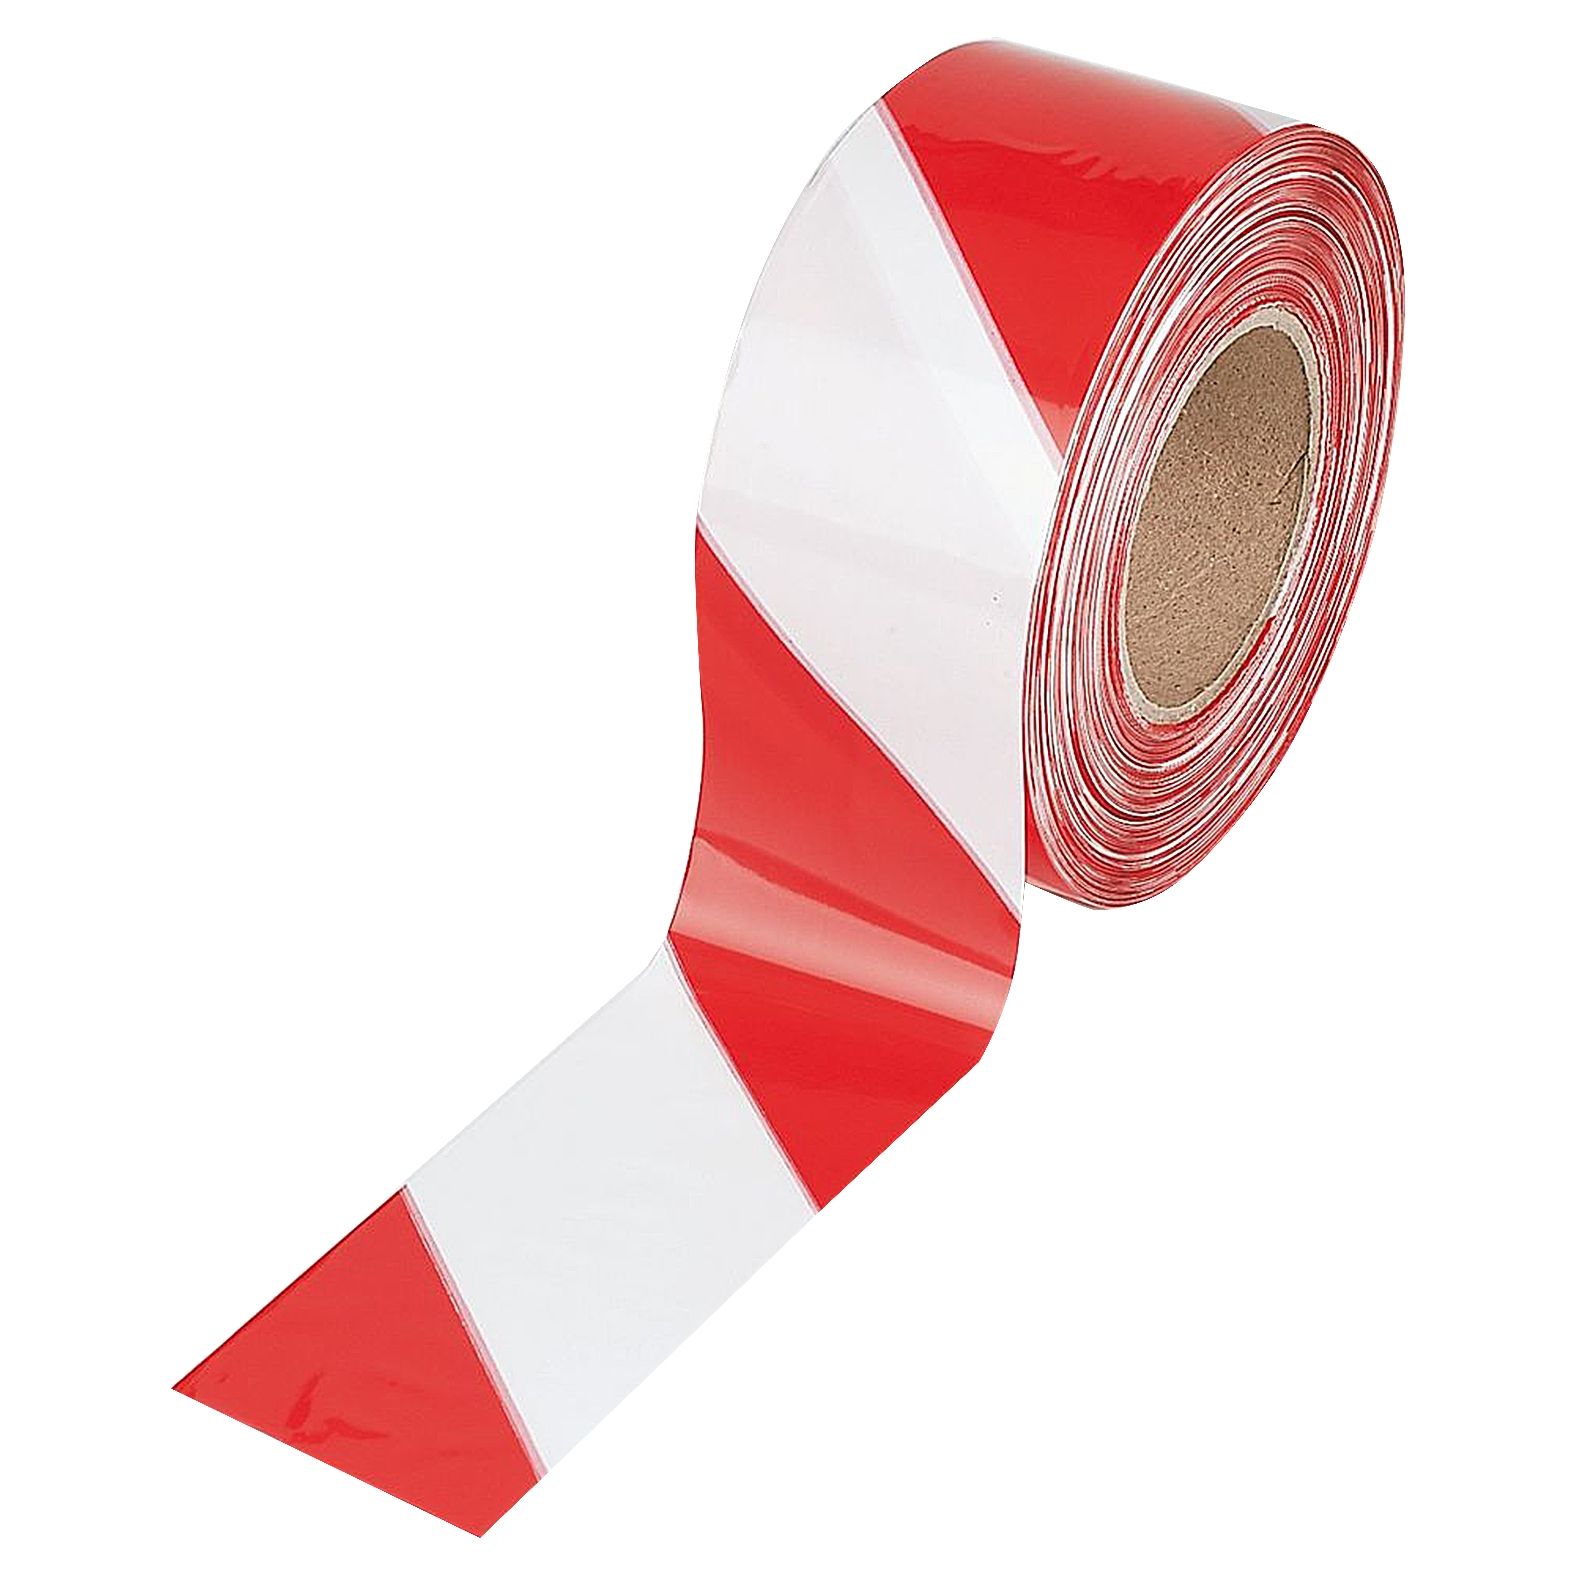 Barrier Tape 70mm X 500M Red/White Safety For Marking Out Hazardous Areas 